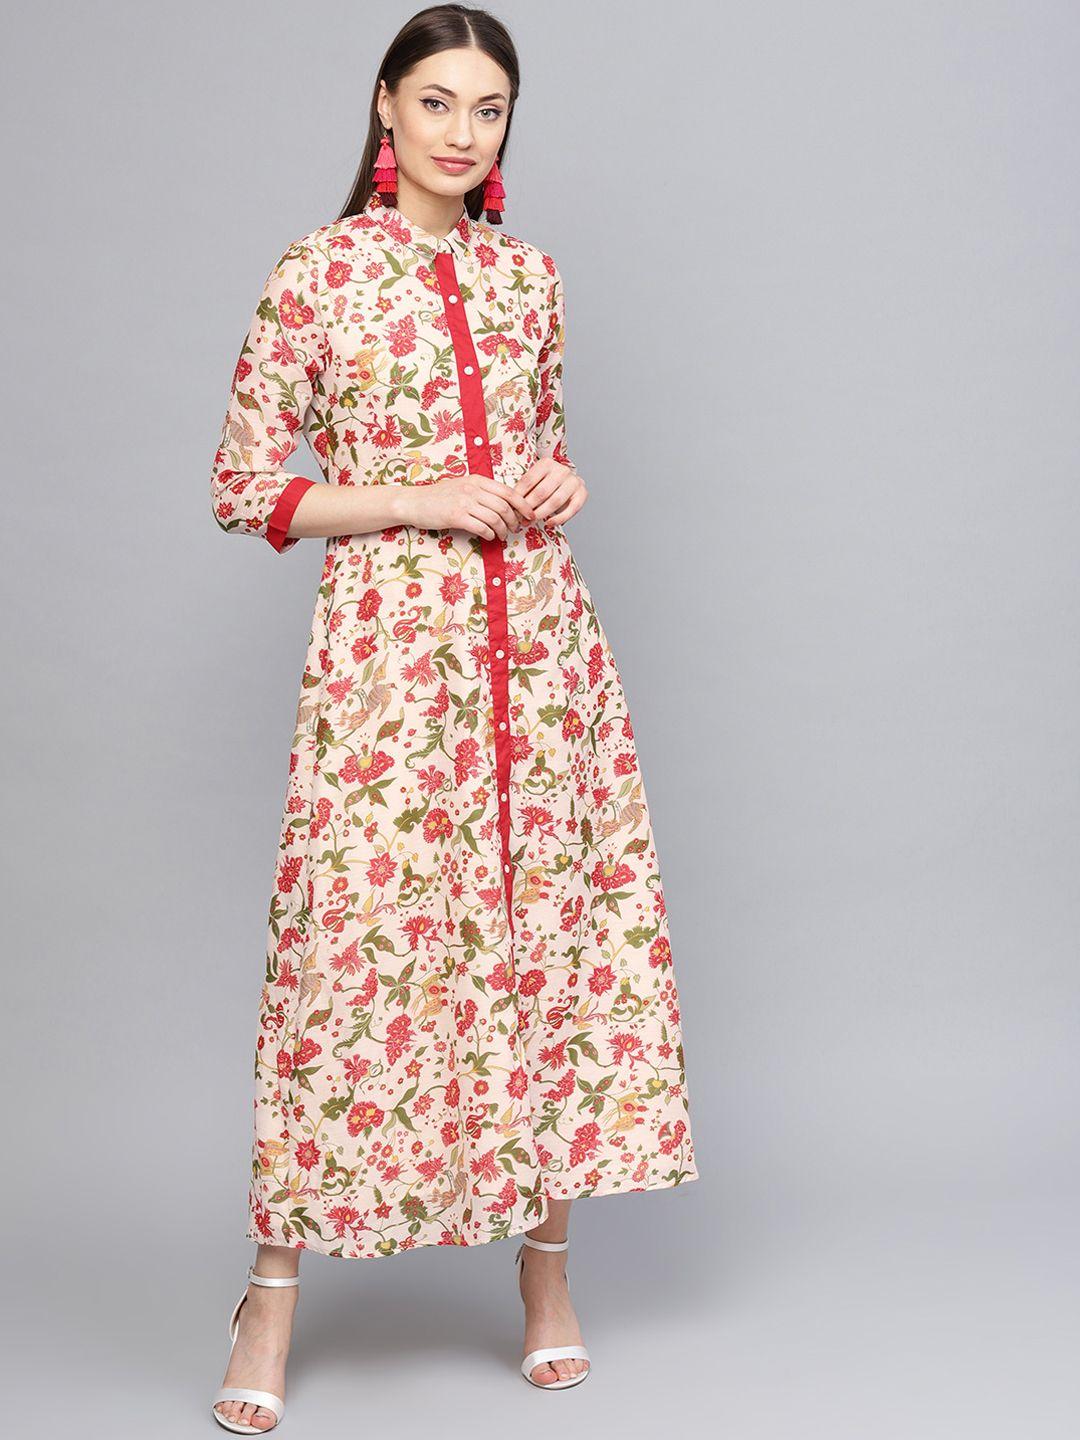 RARE Women Beige & Red Floral Printed Ethnic Shirt Dress